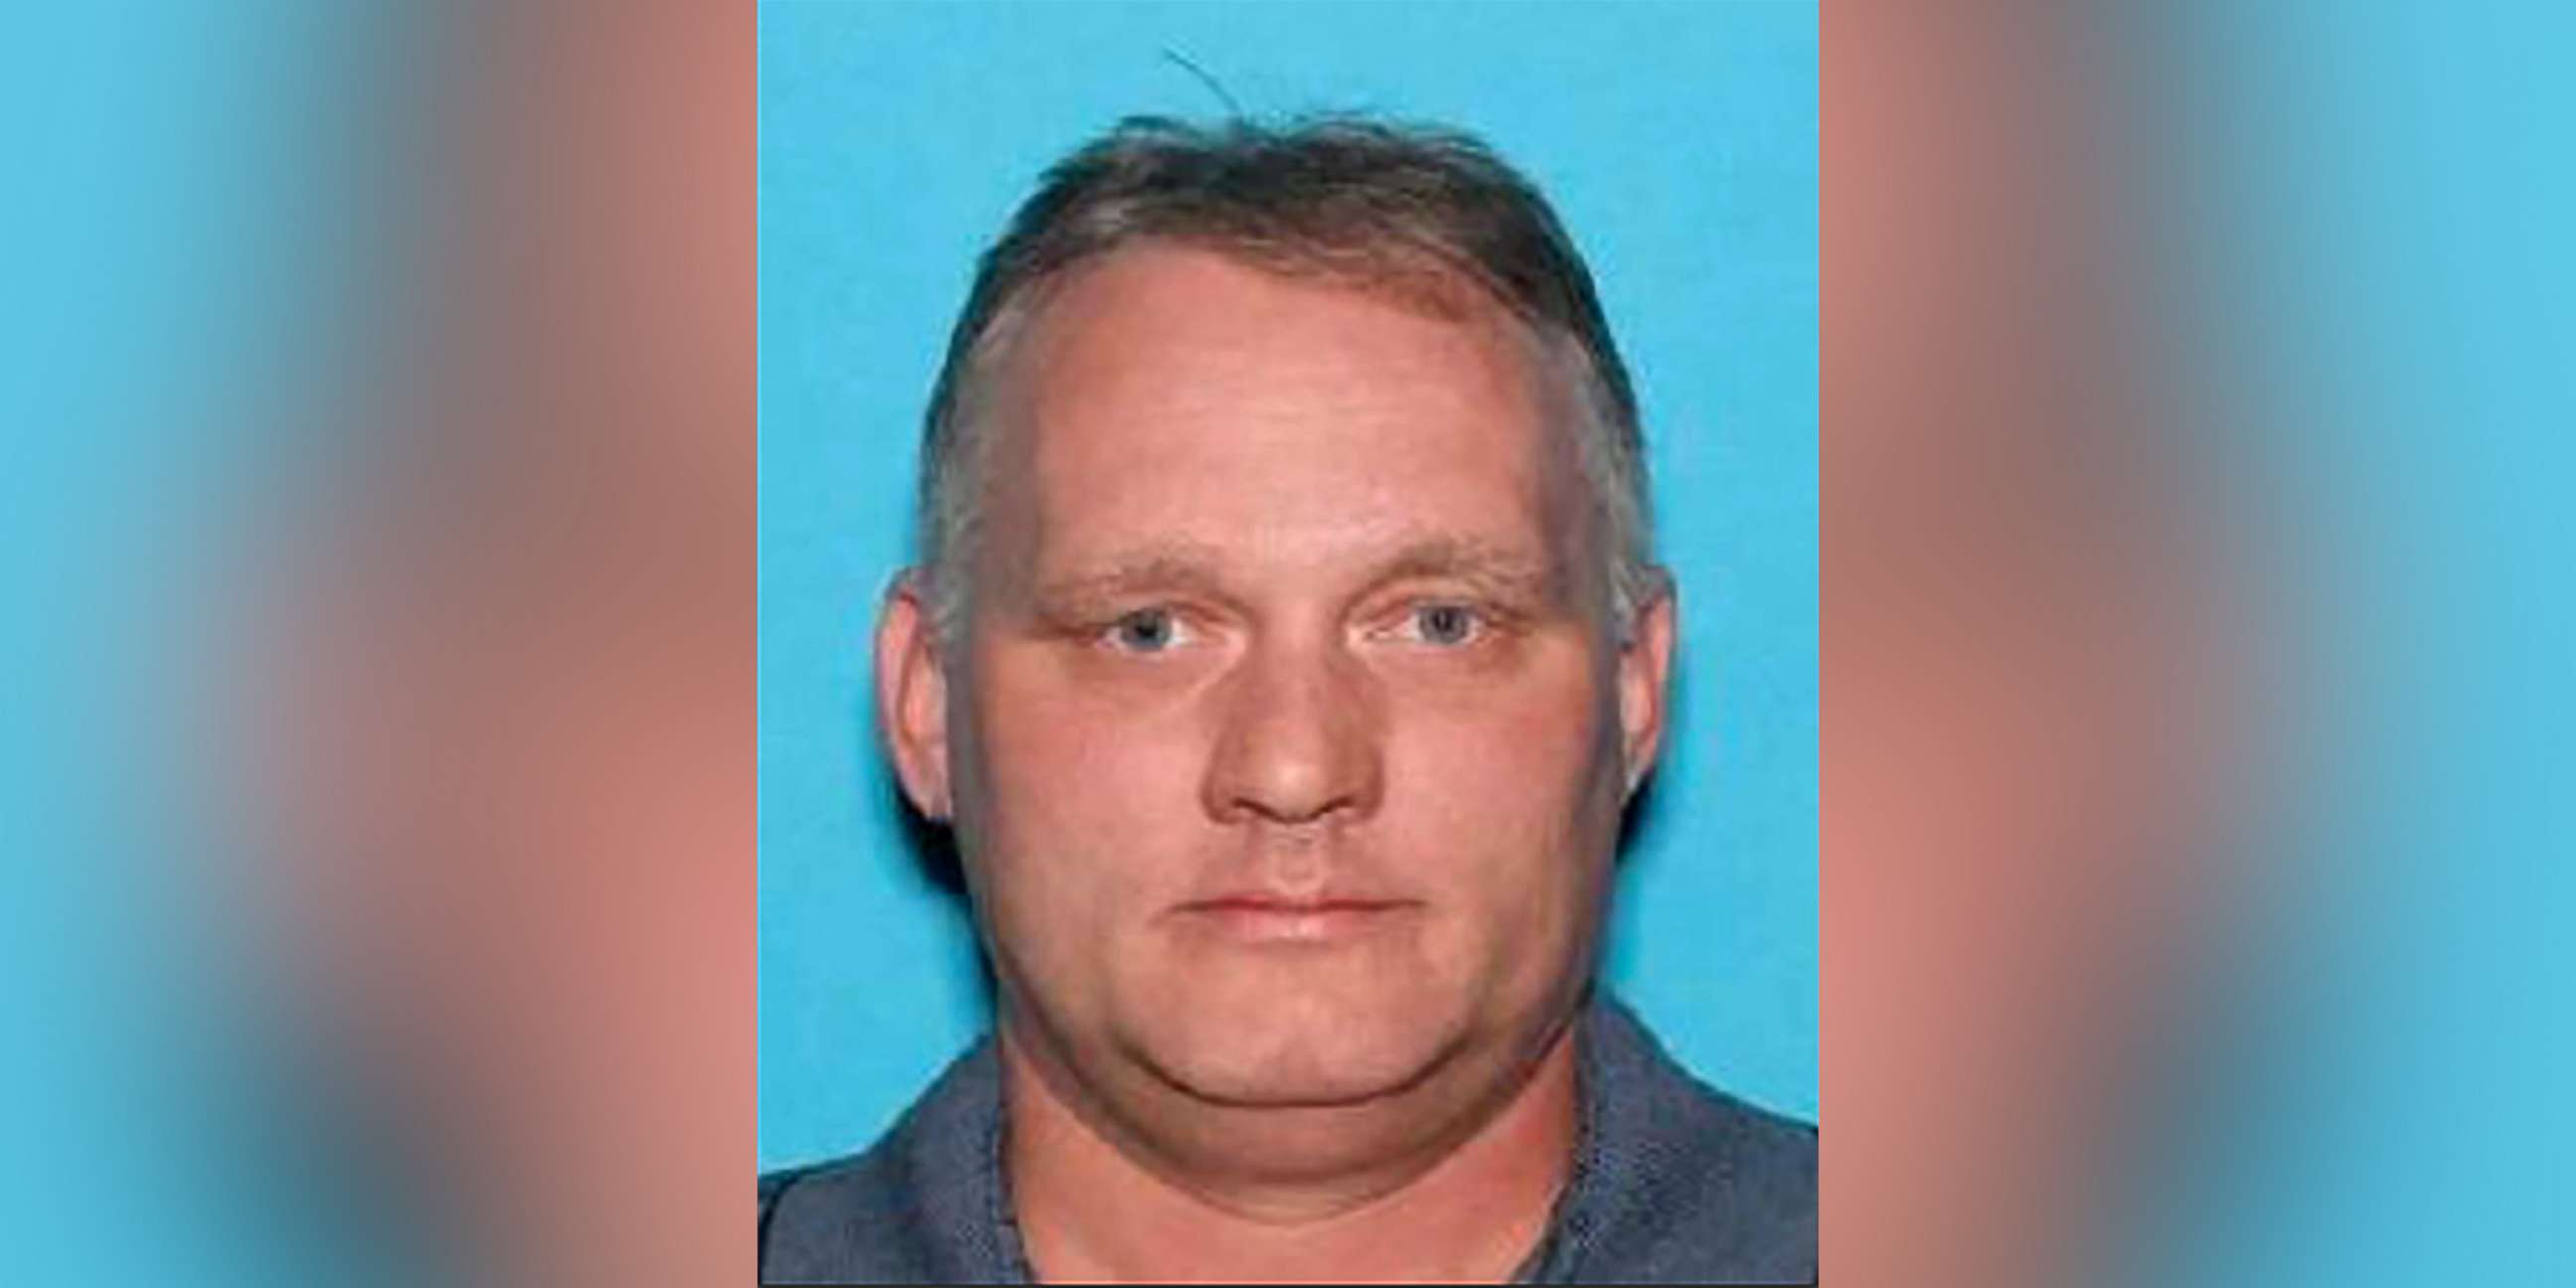 PHOTO: A Department of Motor Vehicles ID picture of Robert Bowers, the suspect of  the attack at the Tree of Life synagogue in Pittsburgh.